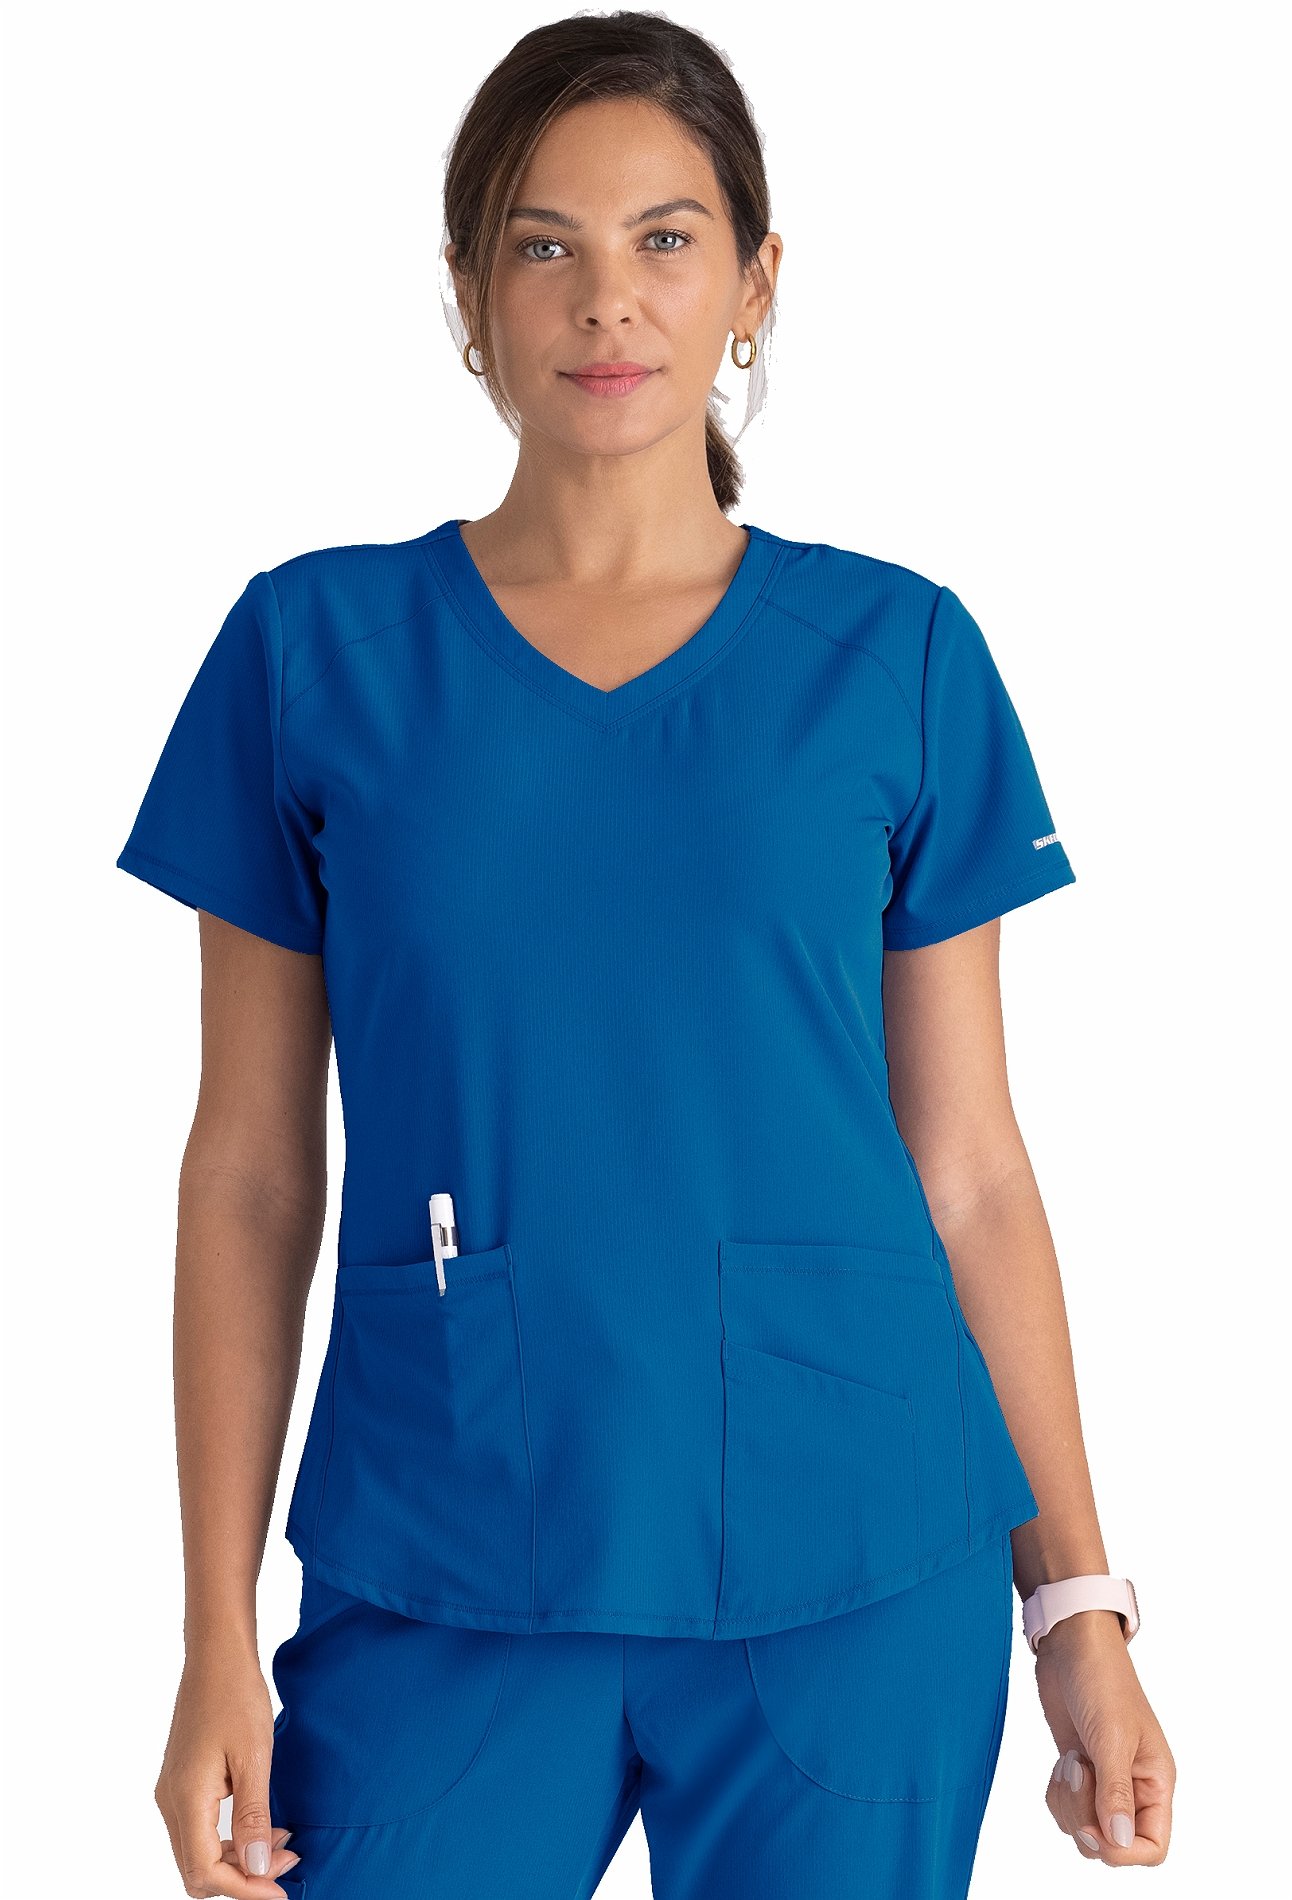 https://medicalscrubscollection.com/content/images/thumbs/0763255_skechers-womens-vitality-v-neck-stretch-scrub-top-sk101.jpeg